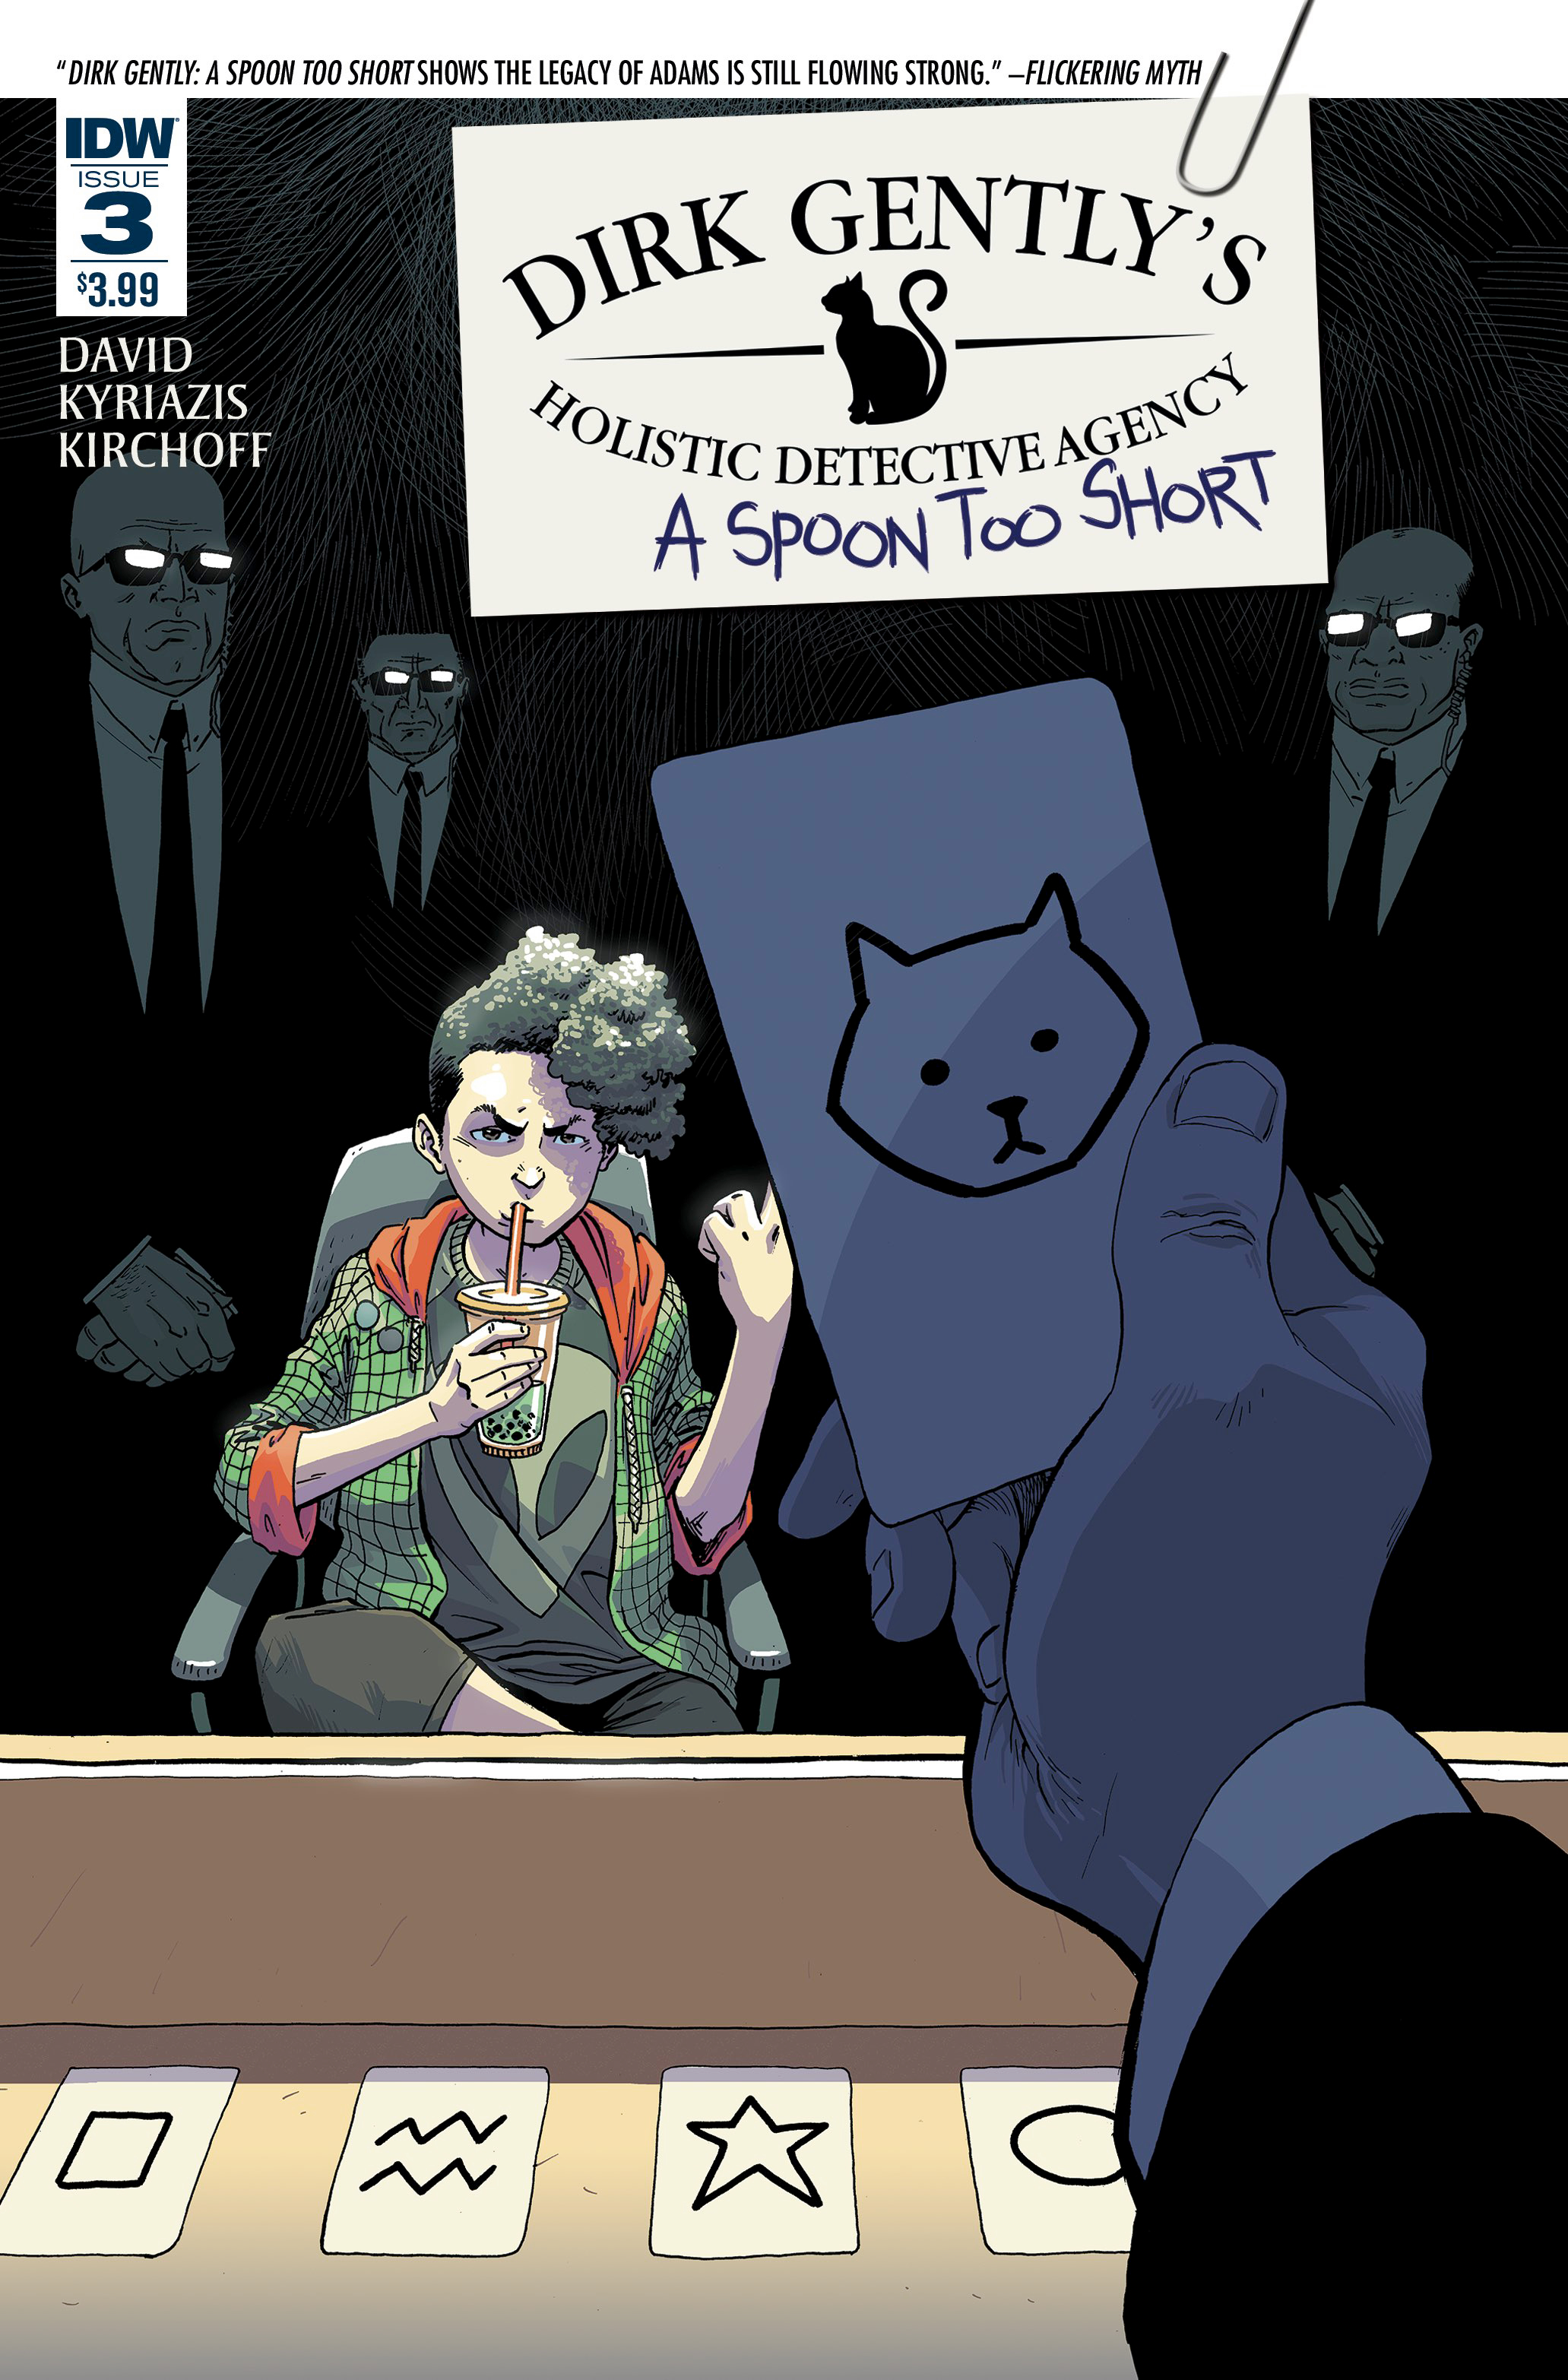 DIRK GENTLY A SPOON TOO SHORT #3 (OF 5)